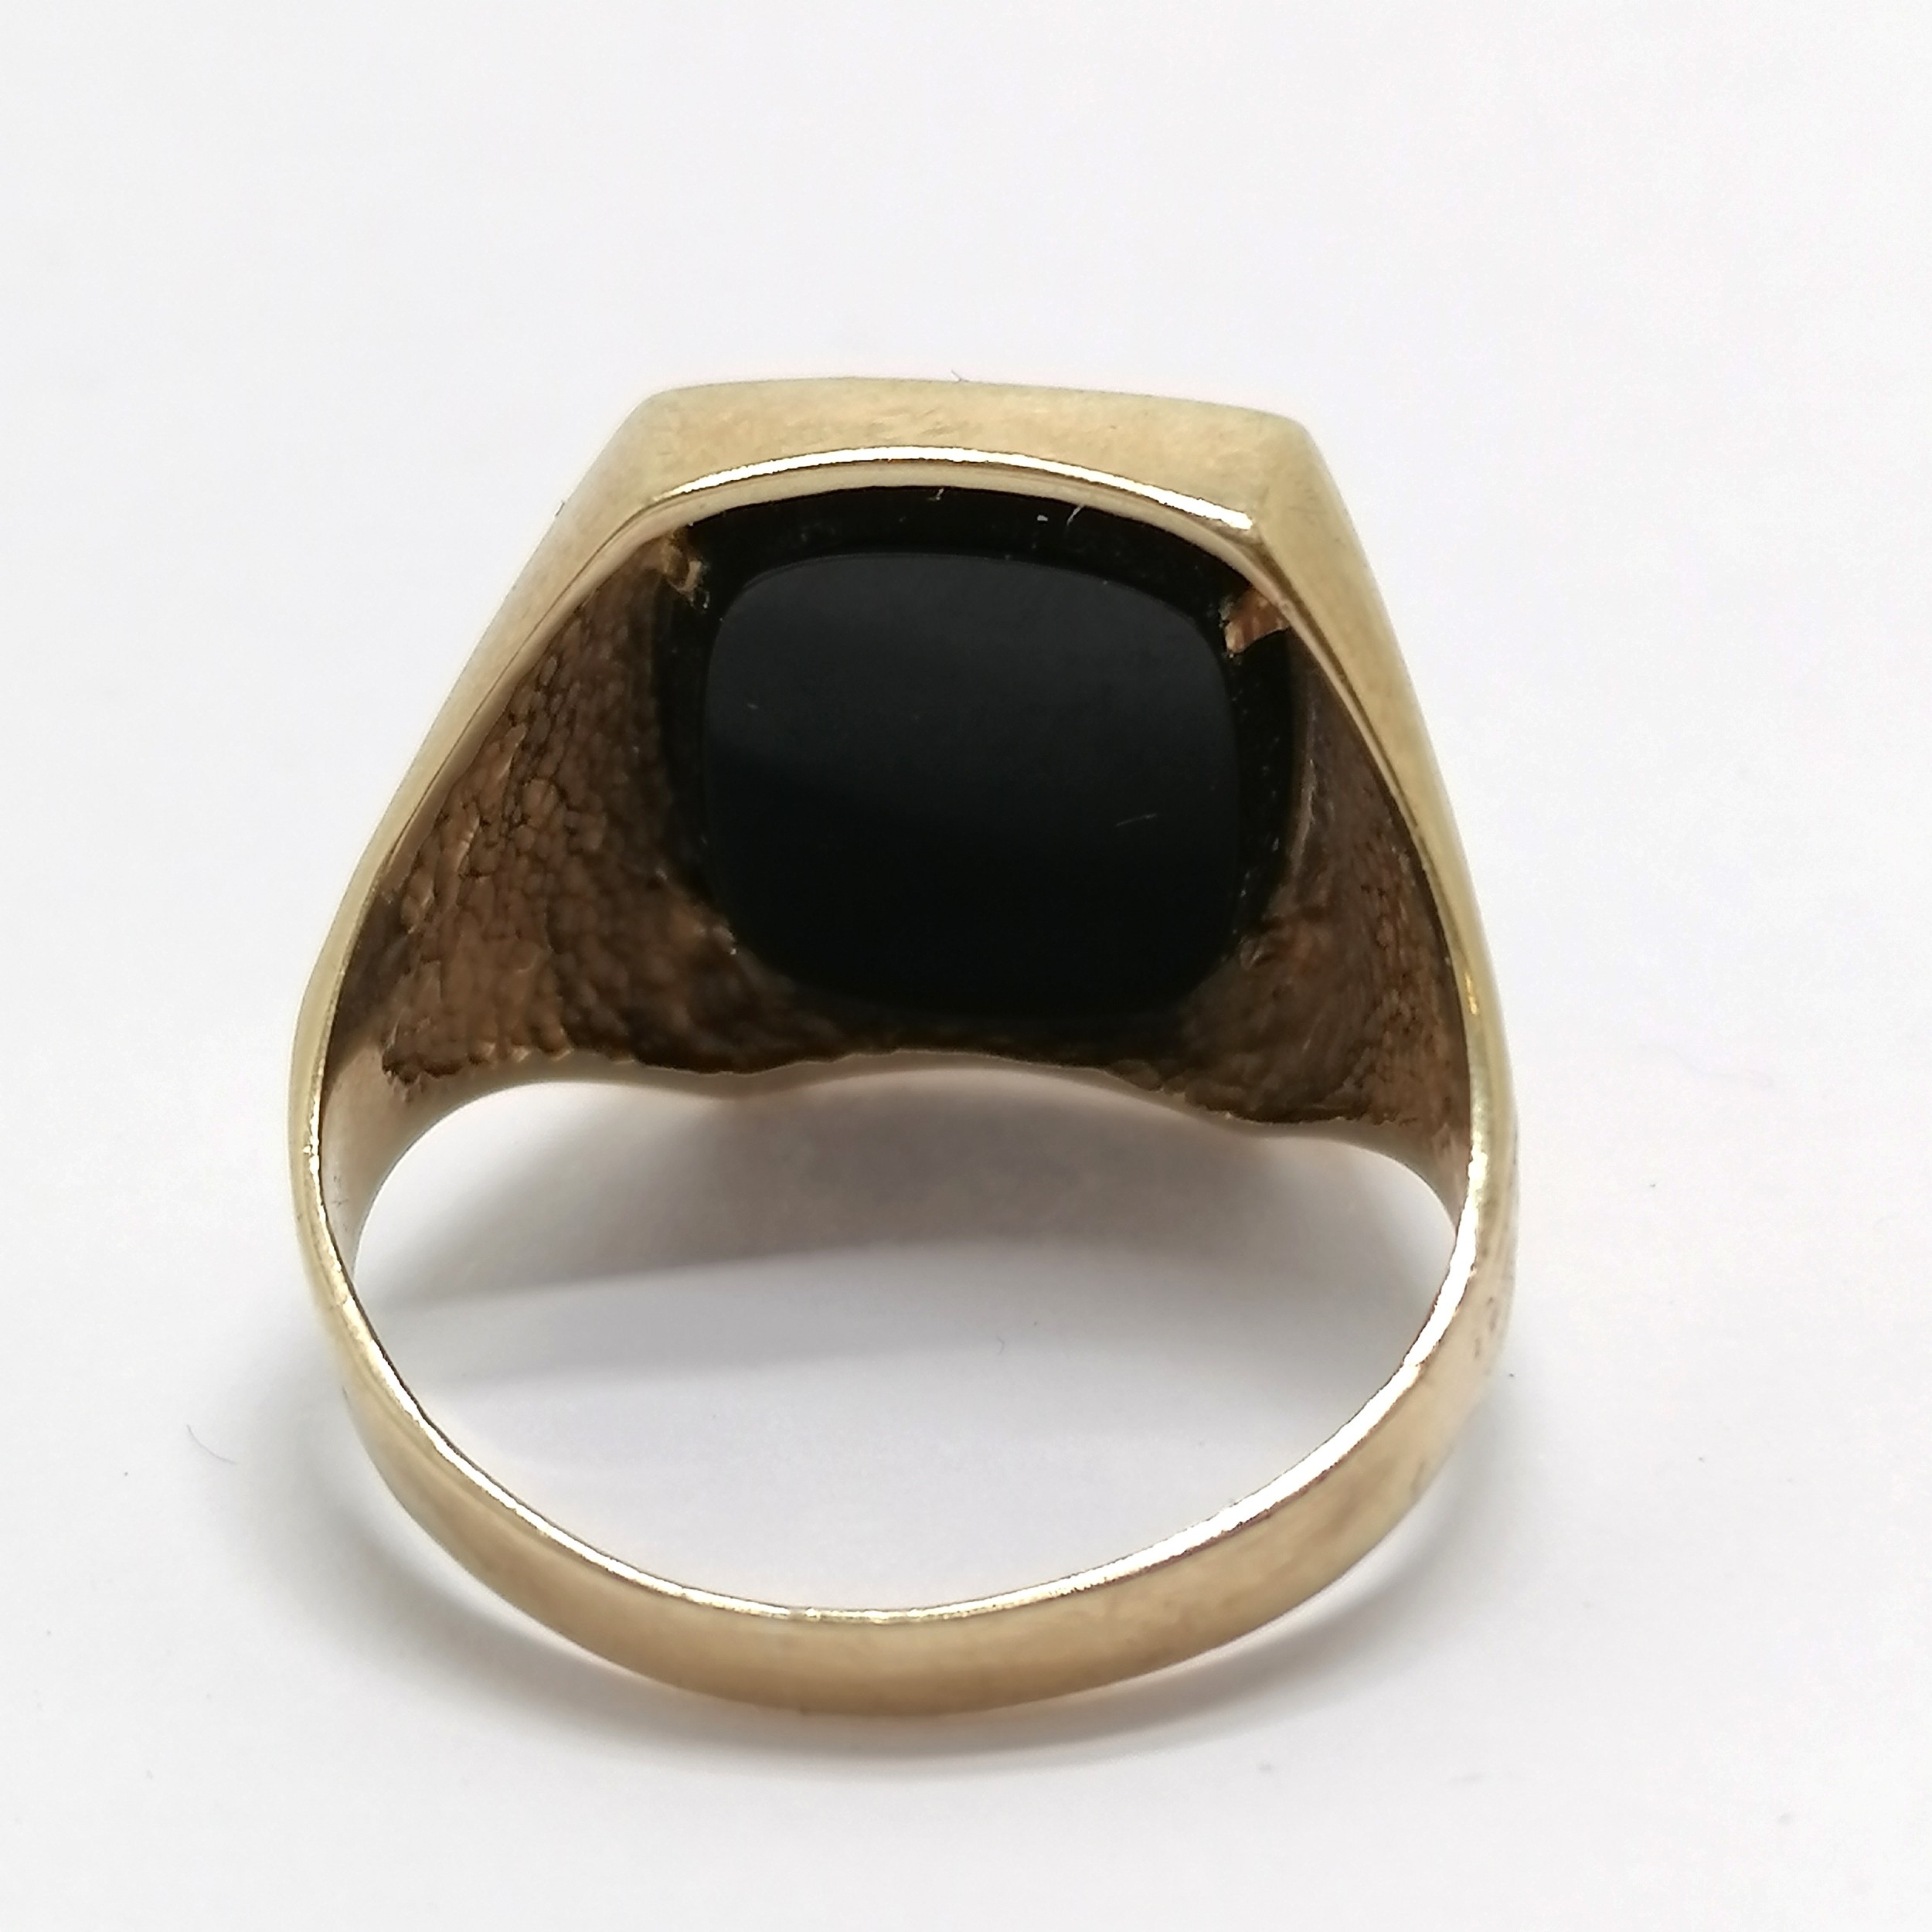 9ct hallmarked gold signet ring with Aries design onyx panel - size U & 5.9g total weight - Image 2 of 3